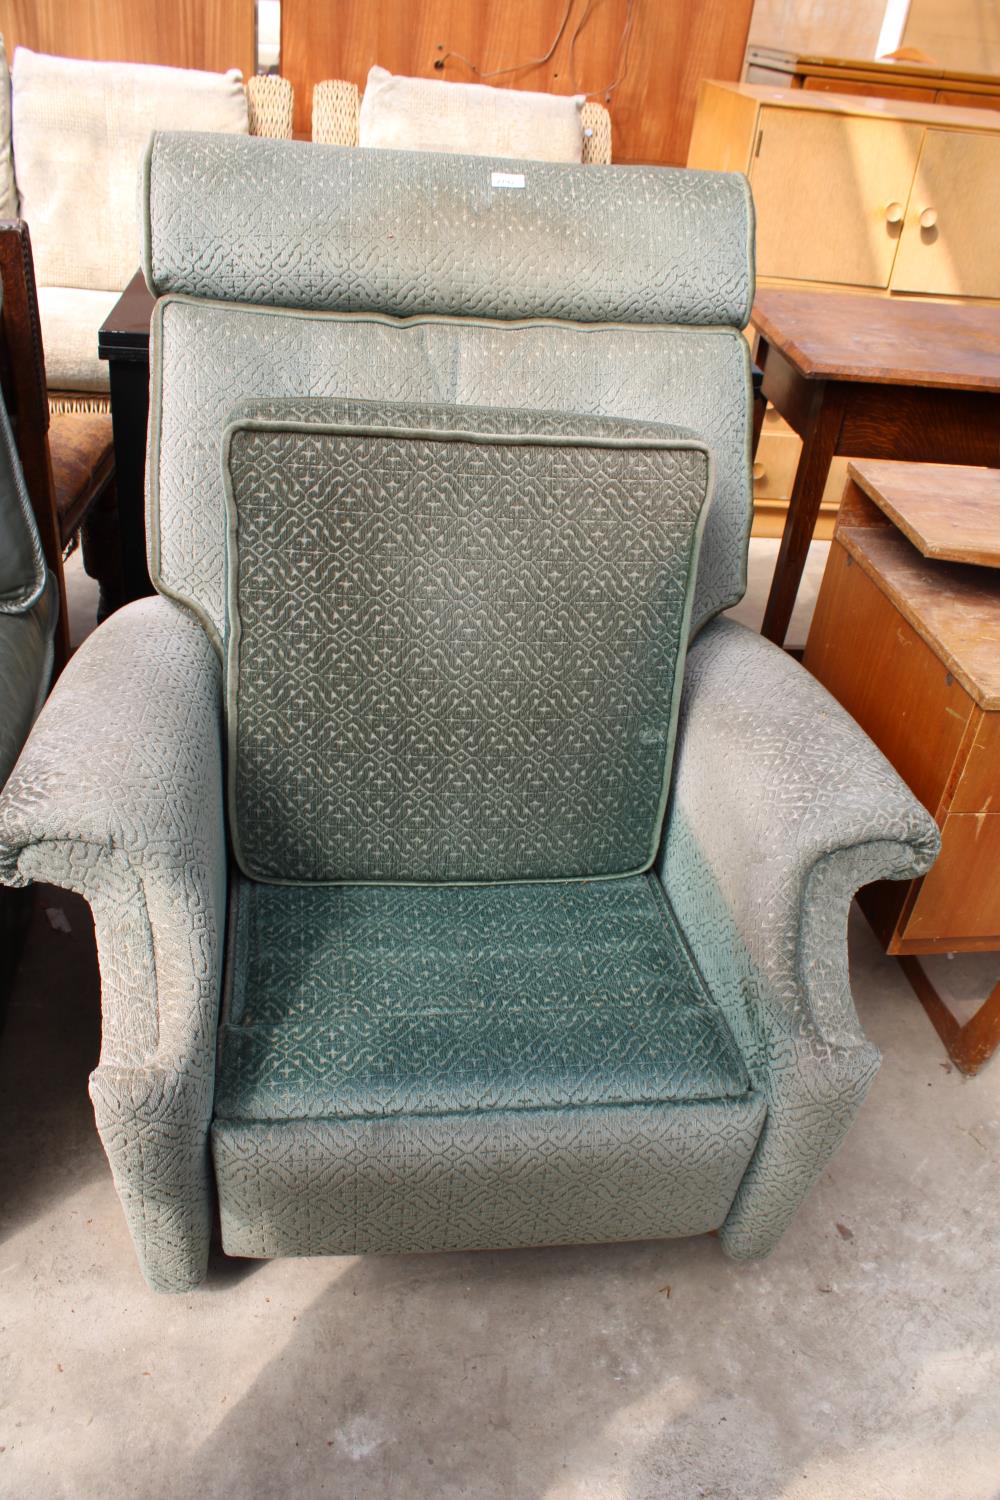 A PARKER KNOLL RECLINER CHAIR, MODEL NO. N30 - Image 2 of 2